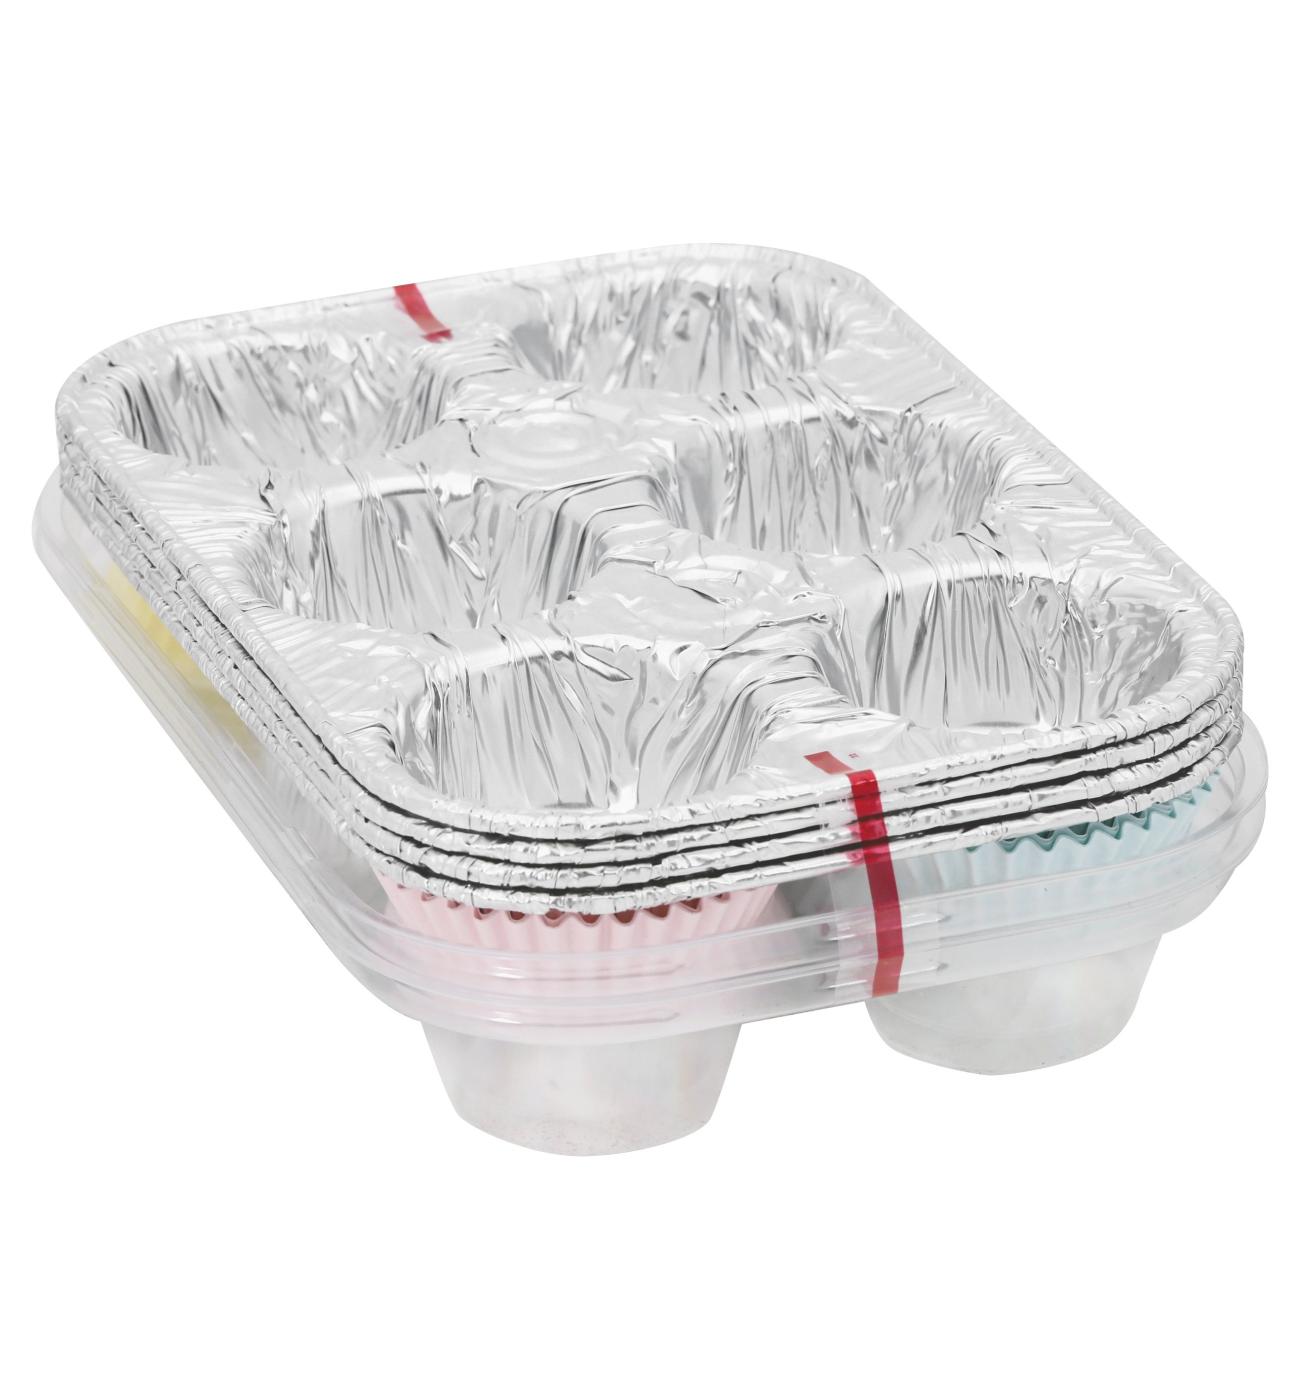 Handi-Foil Fun Colors 13x9 in Cake Pans with Red Lids - Shop Bakeware at  H-E-B